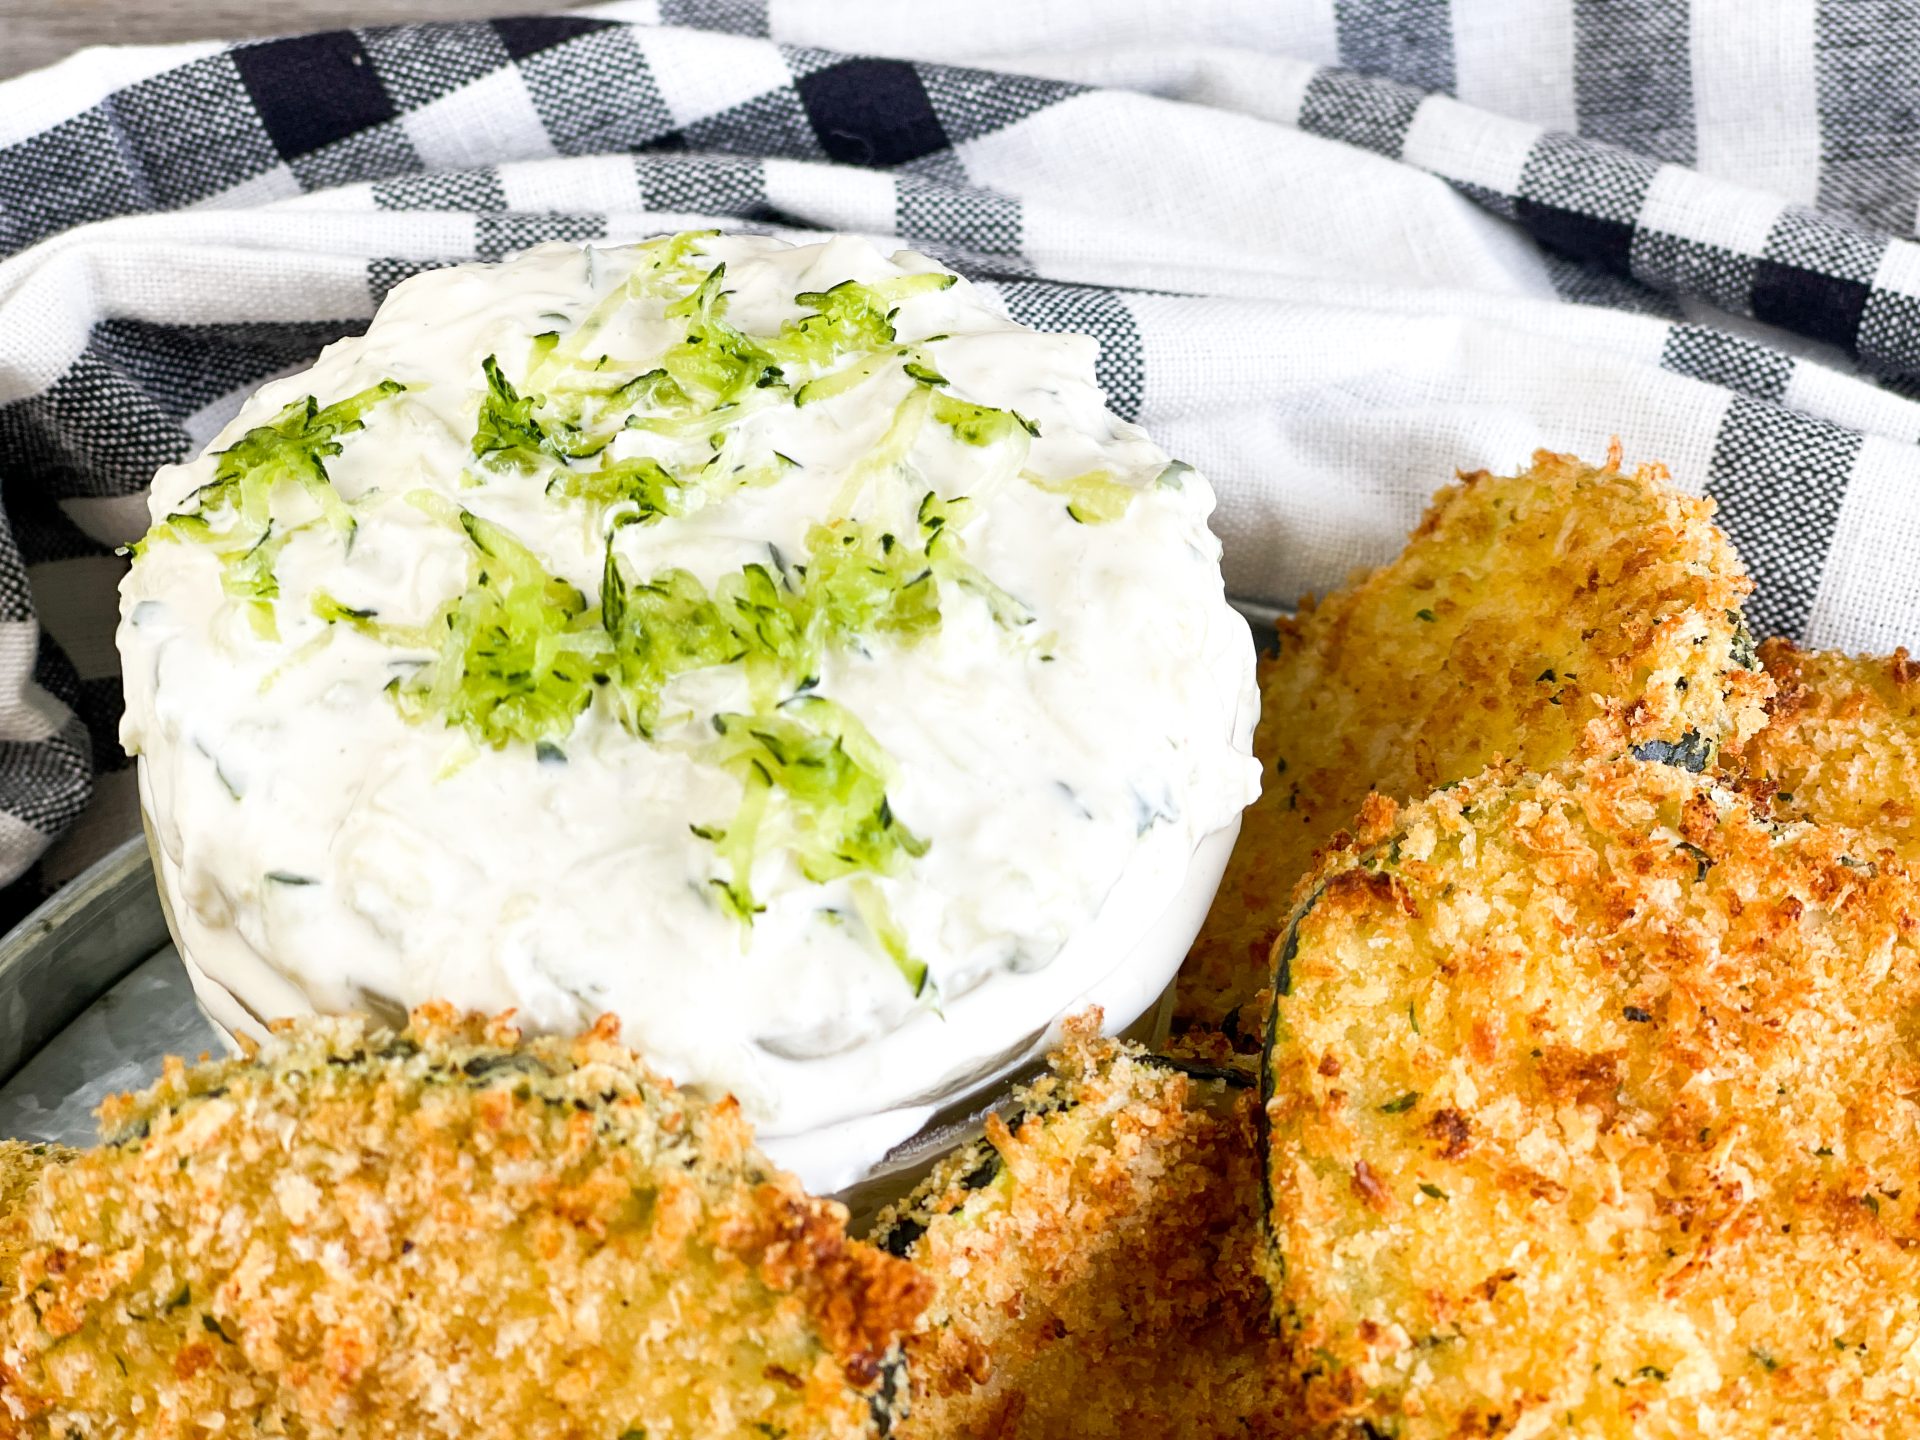 Air Fryer Breaded Zucchini Chips from Farmwife Feeds. All the yumminess and crispiness of a traditional fried zucchini buy no deep frying! #friedzucchini #zucchini #gardenproduce